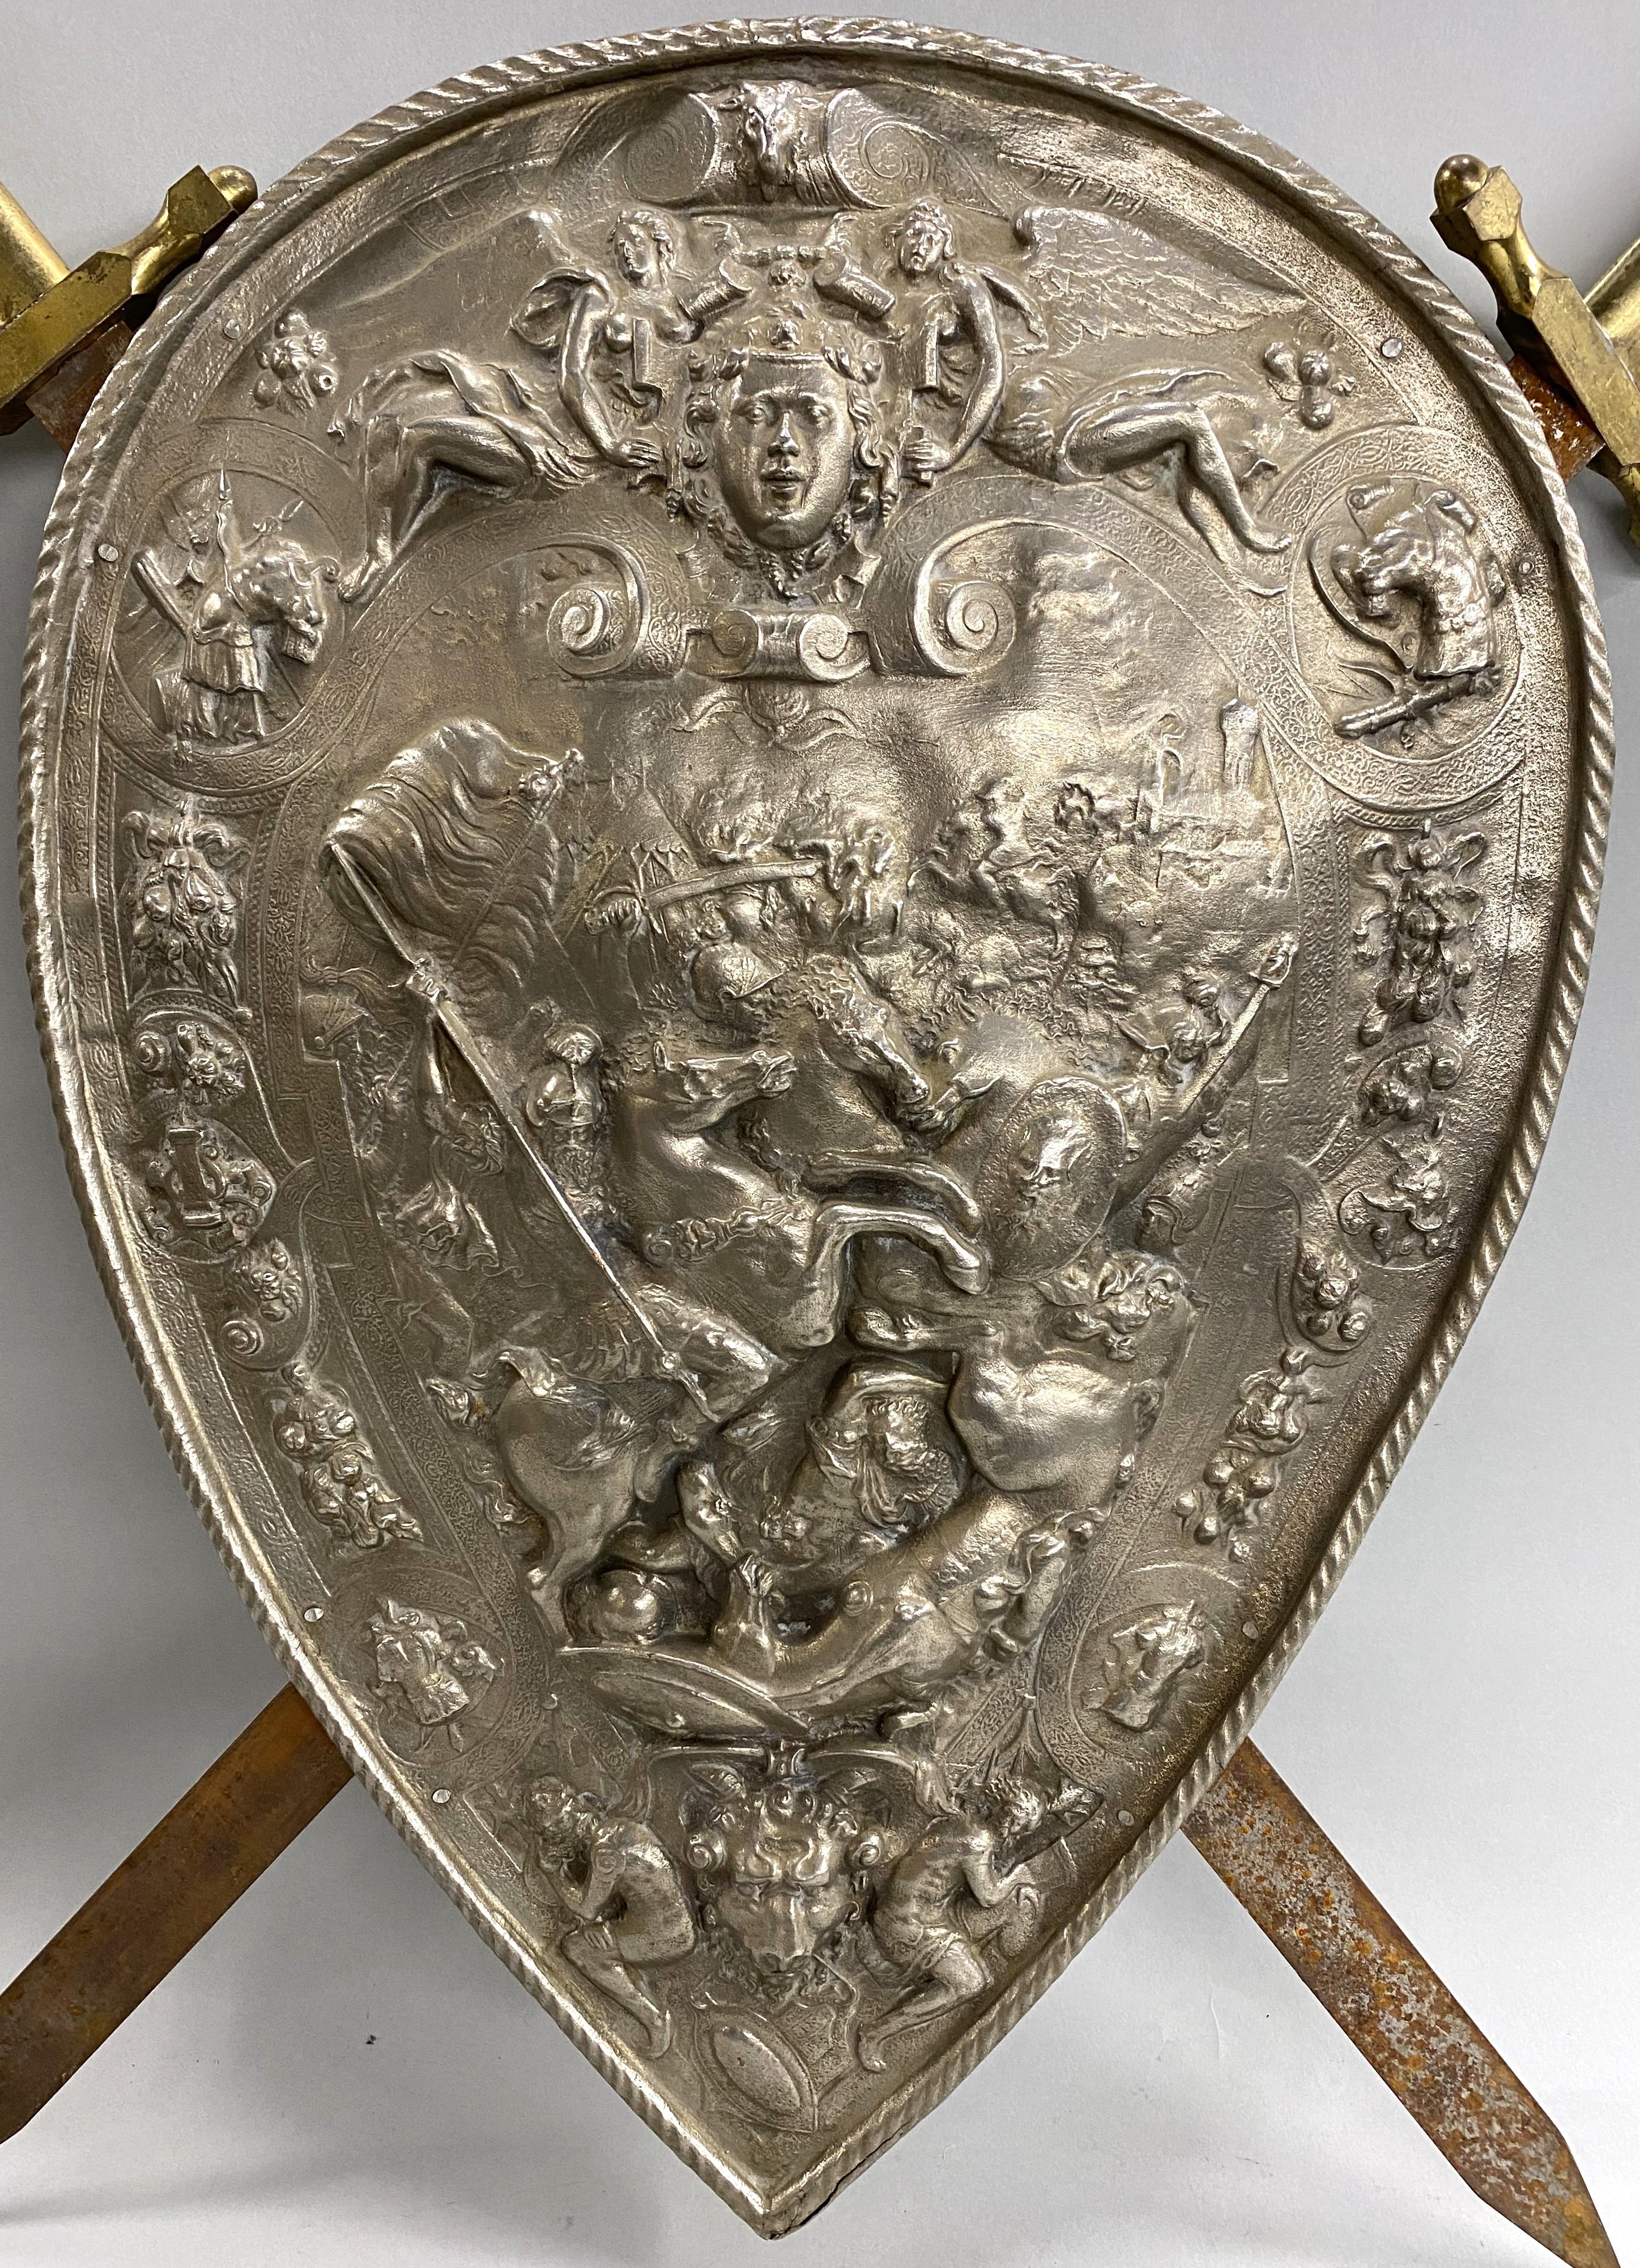 A fine pair of Classical Revival ceremonial swords with brassed handles, attached to a pressed steel shield with nickel plating featuring classical, angelic and military figures, some on horseback, and ram’s head accented with scrollwork and foliate